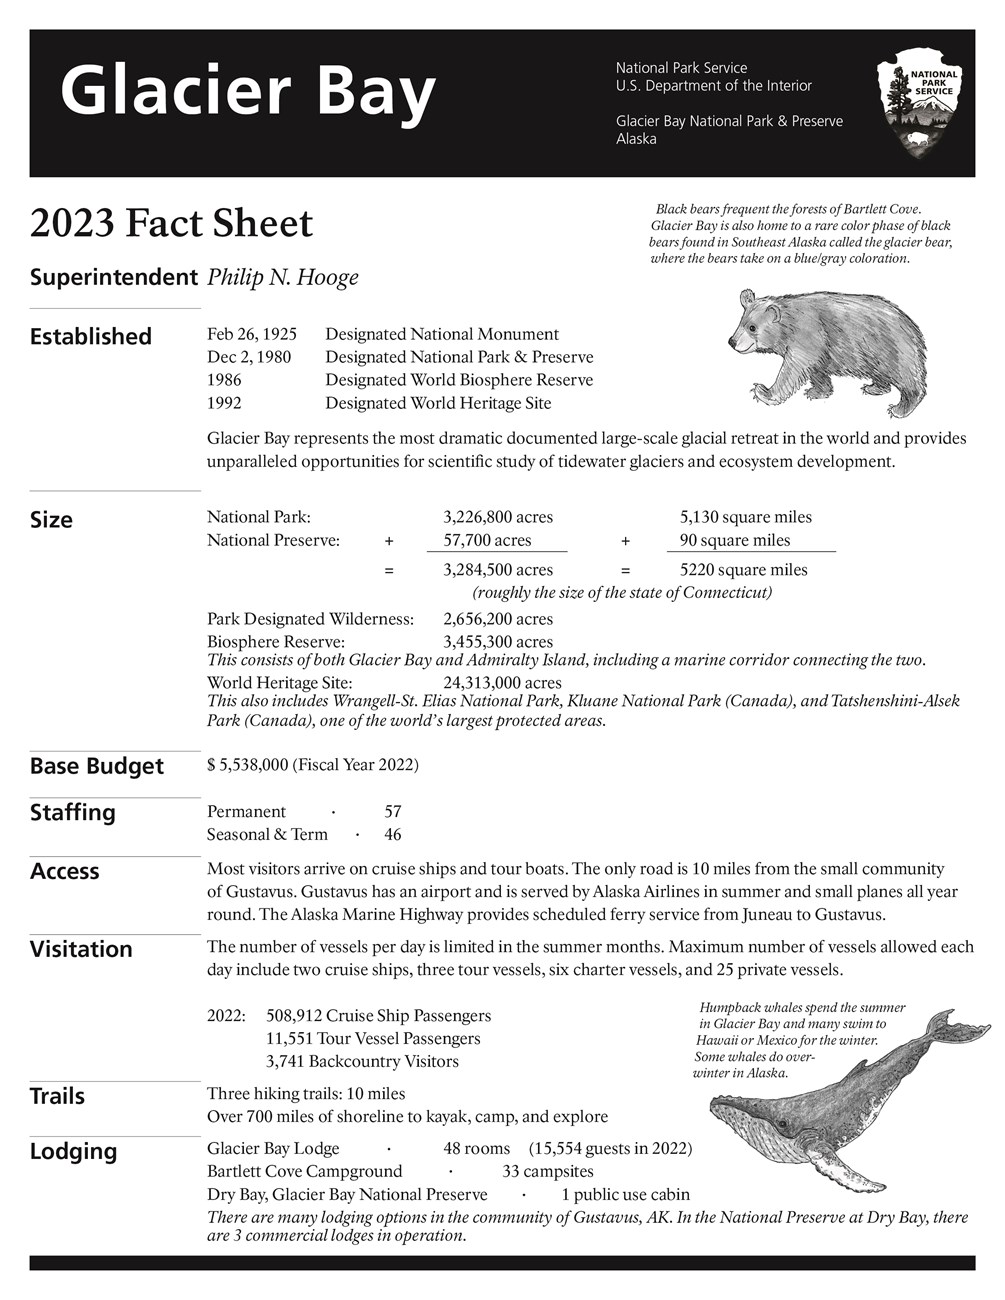 2023 Glacier Bay Fact Sheet page 1. Contact the park for details of this flyer, or find an accessible pdf on our website.